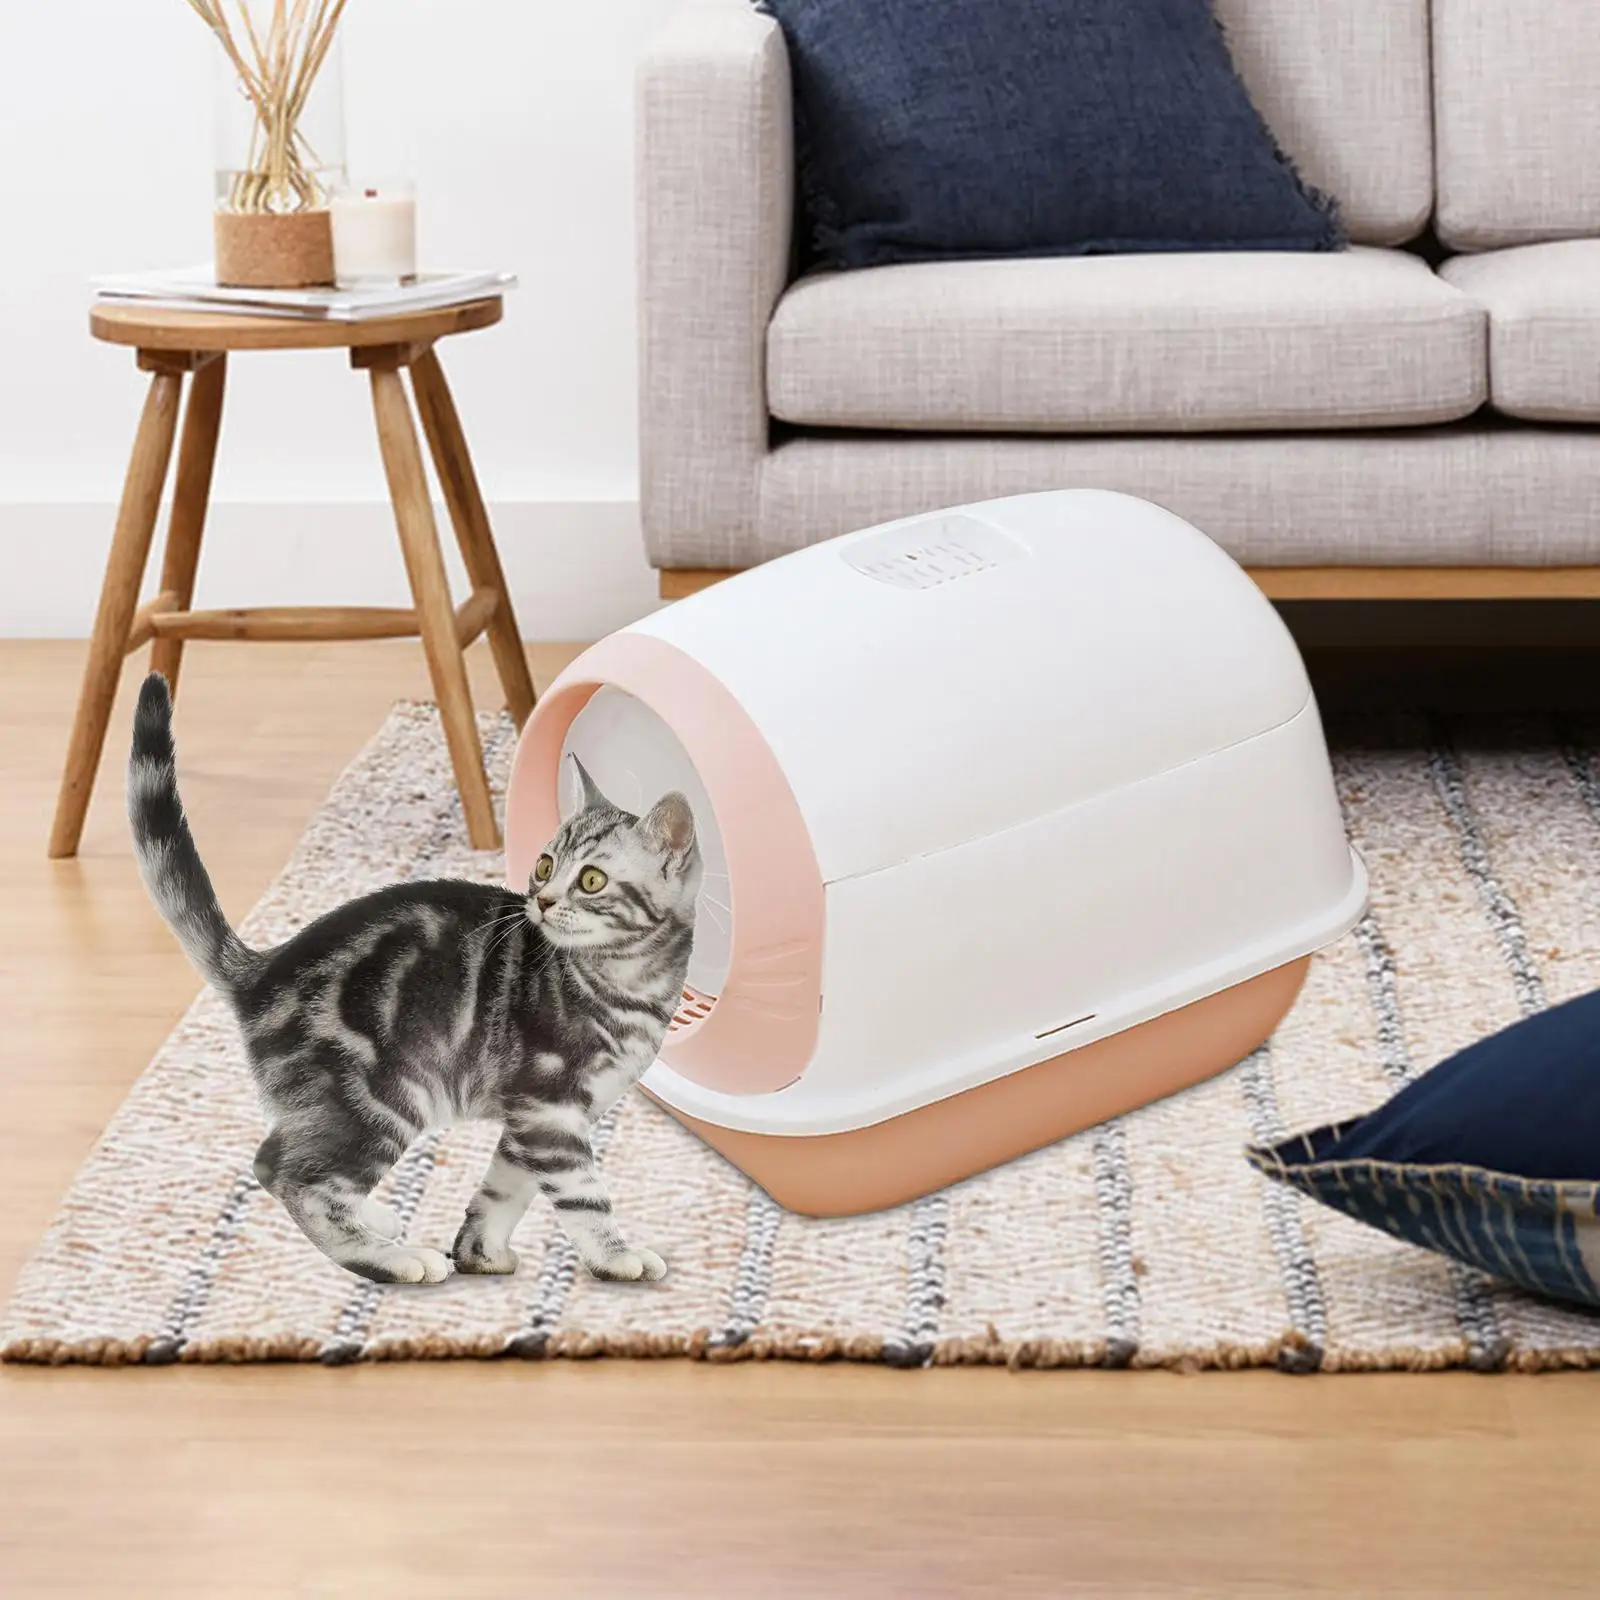 Hooded Cat Litter Box Enclosed Potty Toilet Deep Loo Container Pet Litter Tray for Rabbit